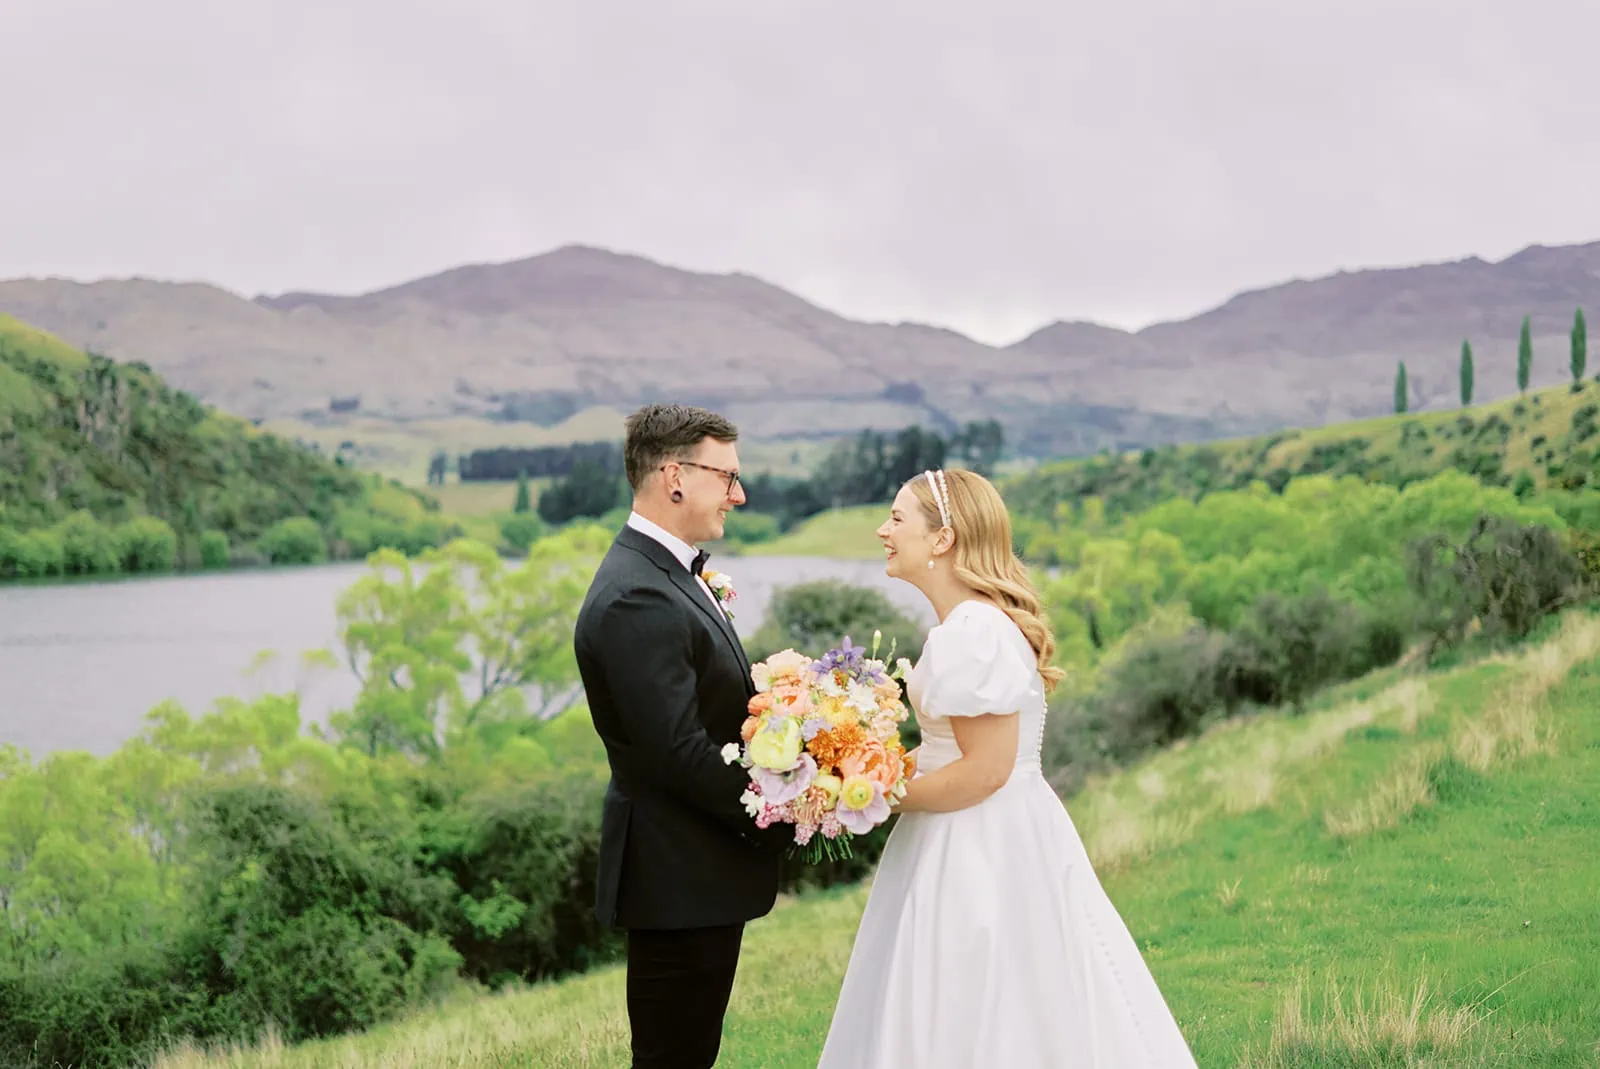 Queenstown New Zealand Heli Wedding Elopement Photographer クイーンズタウン　ニュージーランド　エロープメント 結婚式 | A couple in wedding attire smiling at each other outdoors with a bouquet and Lake Johnson in the background.